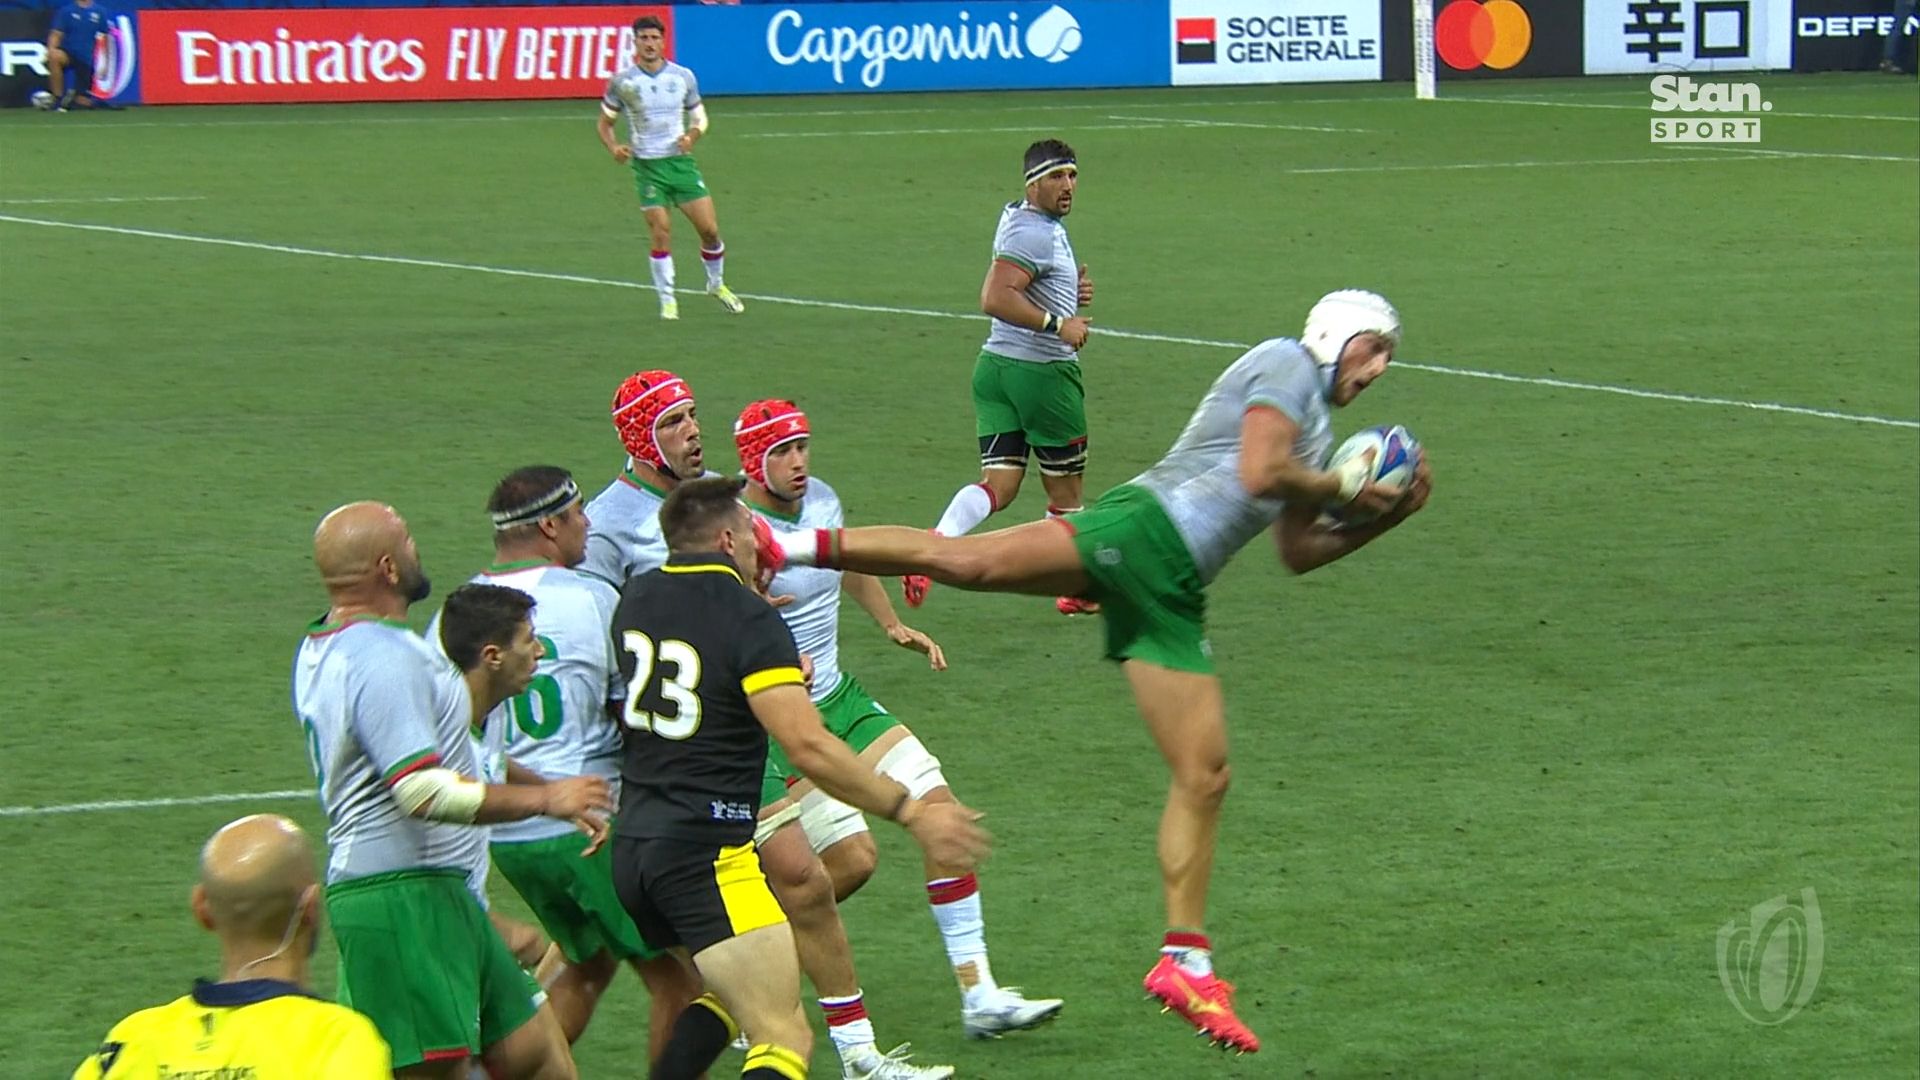 Portugal wins one case and loses another for acts of foul play in the Rugby World Cup